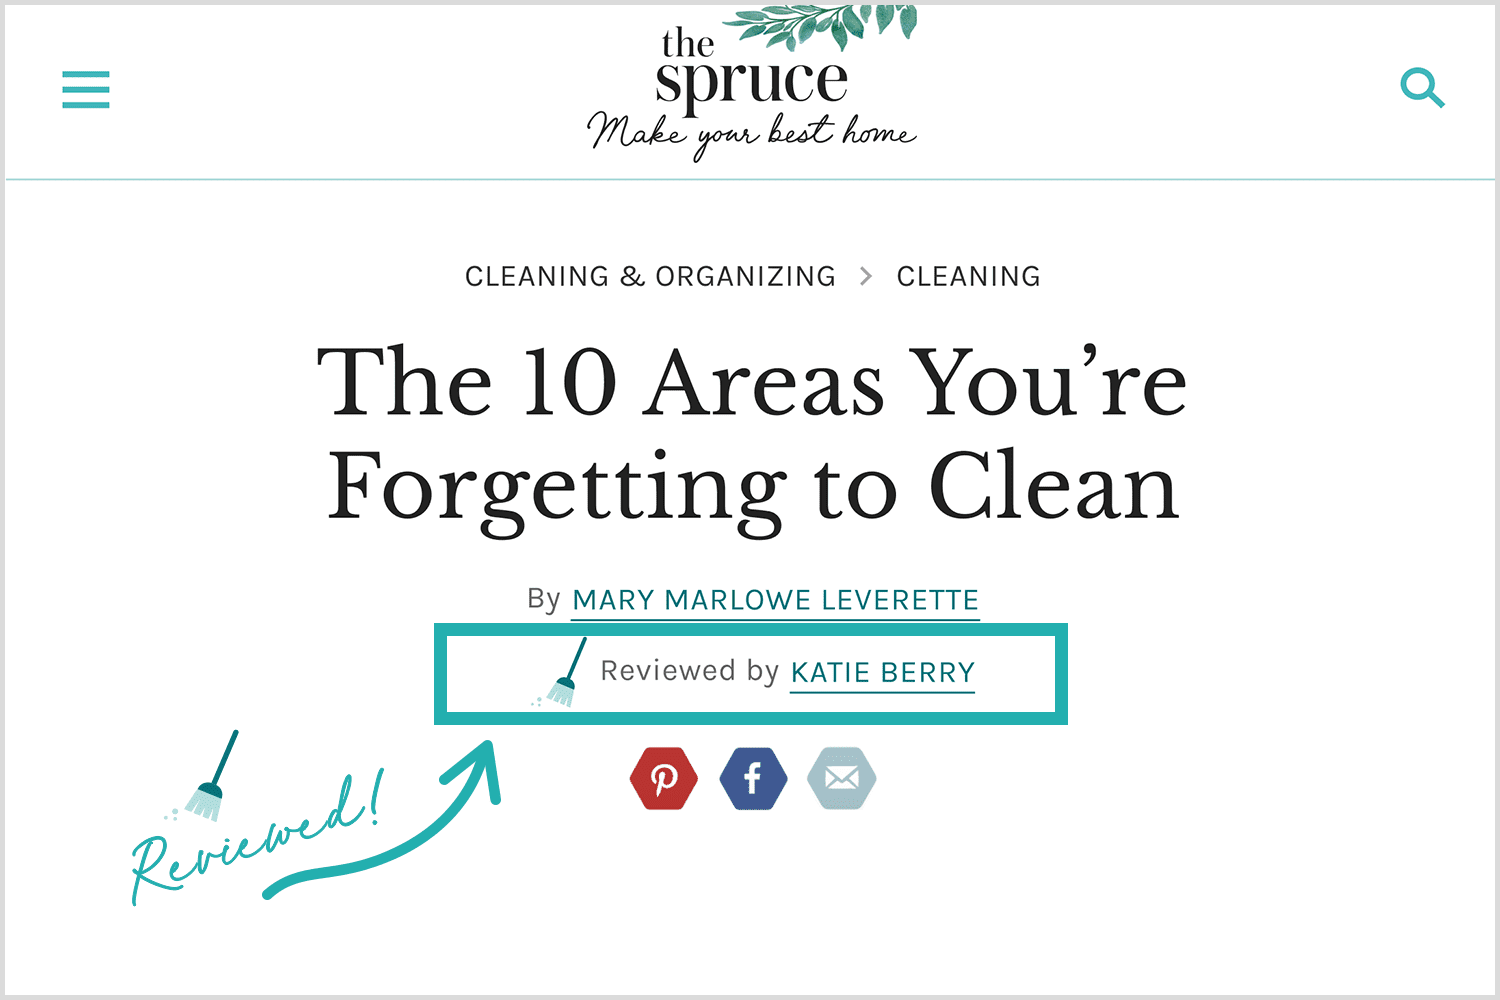 How you can tell if an article was reviewed by The Spruce's Cleaning Review Board